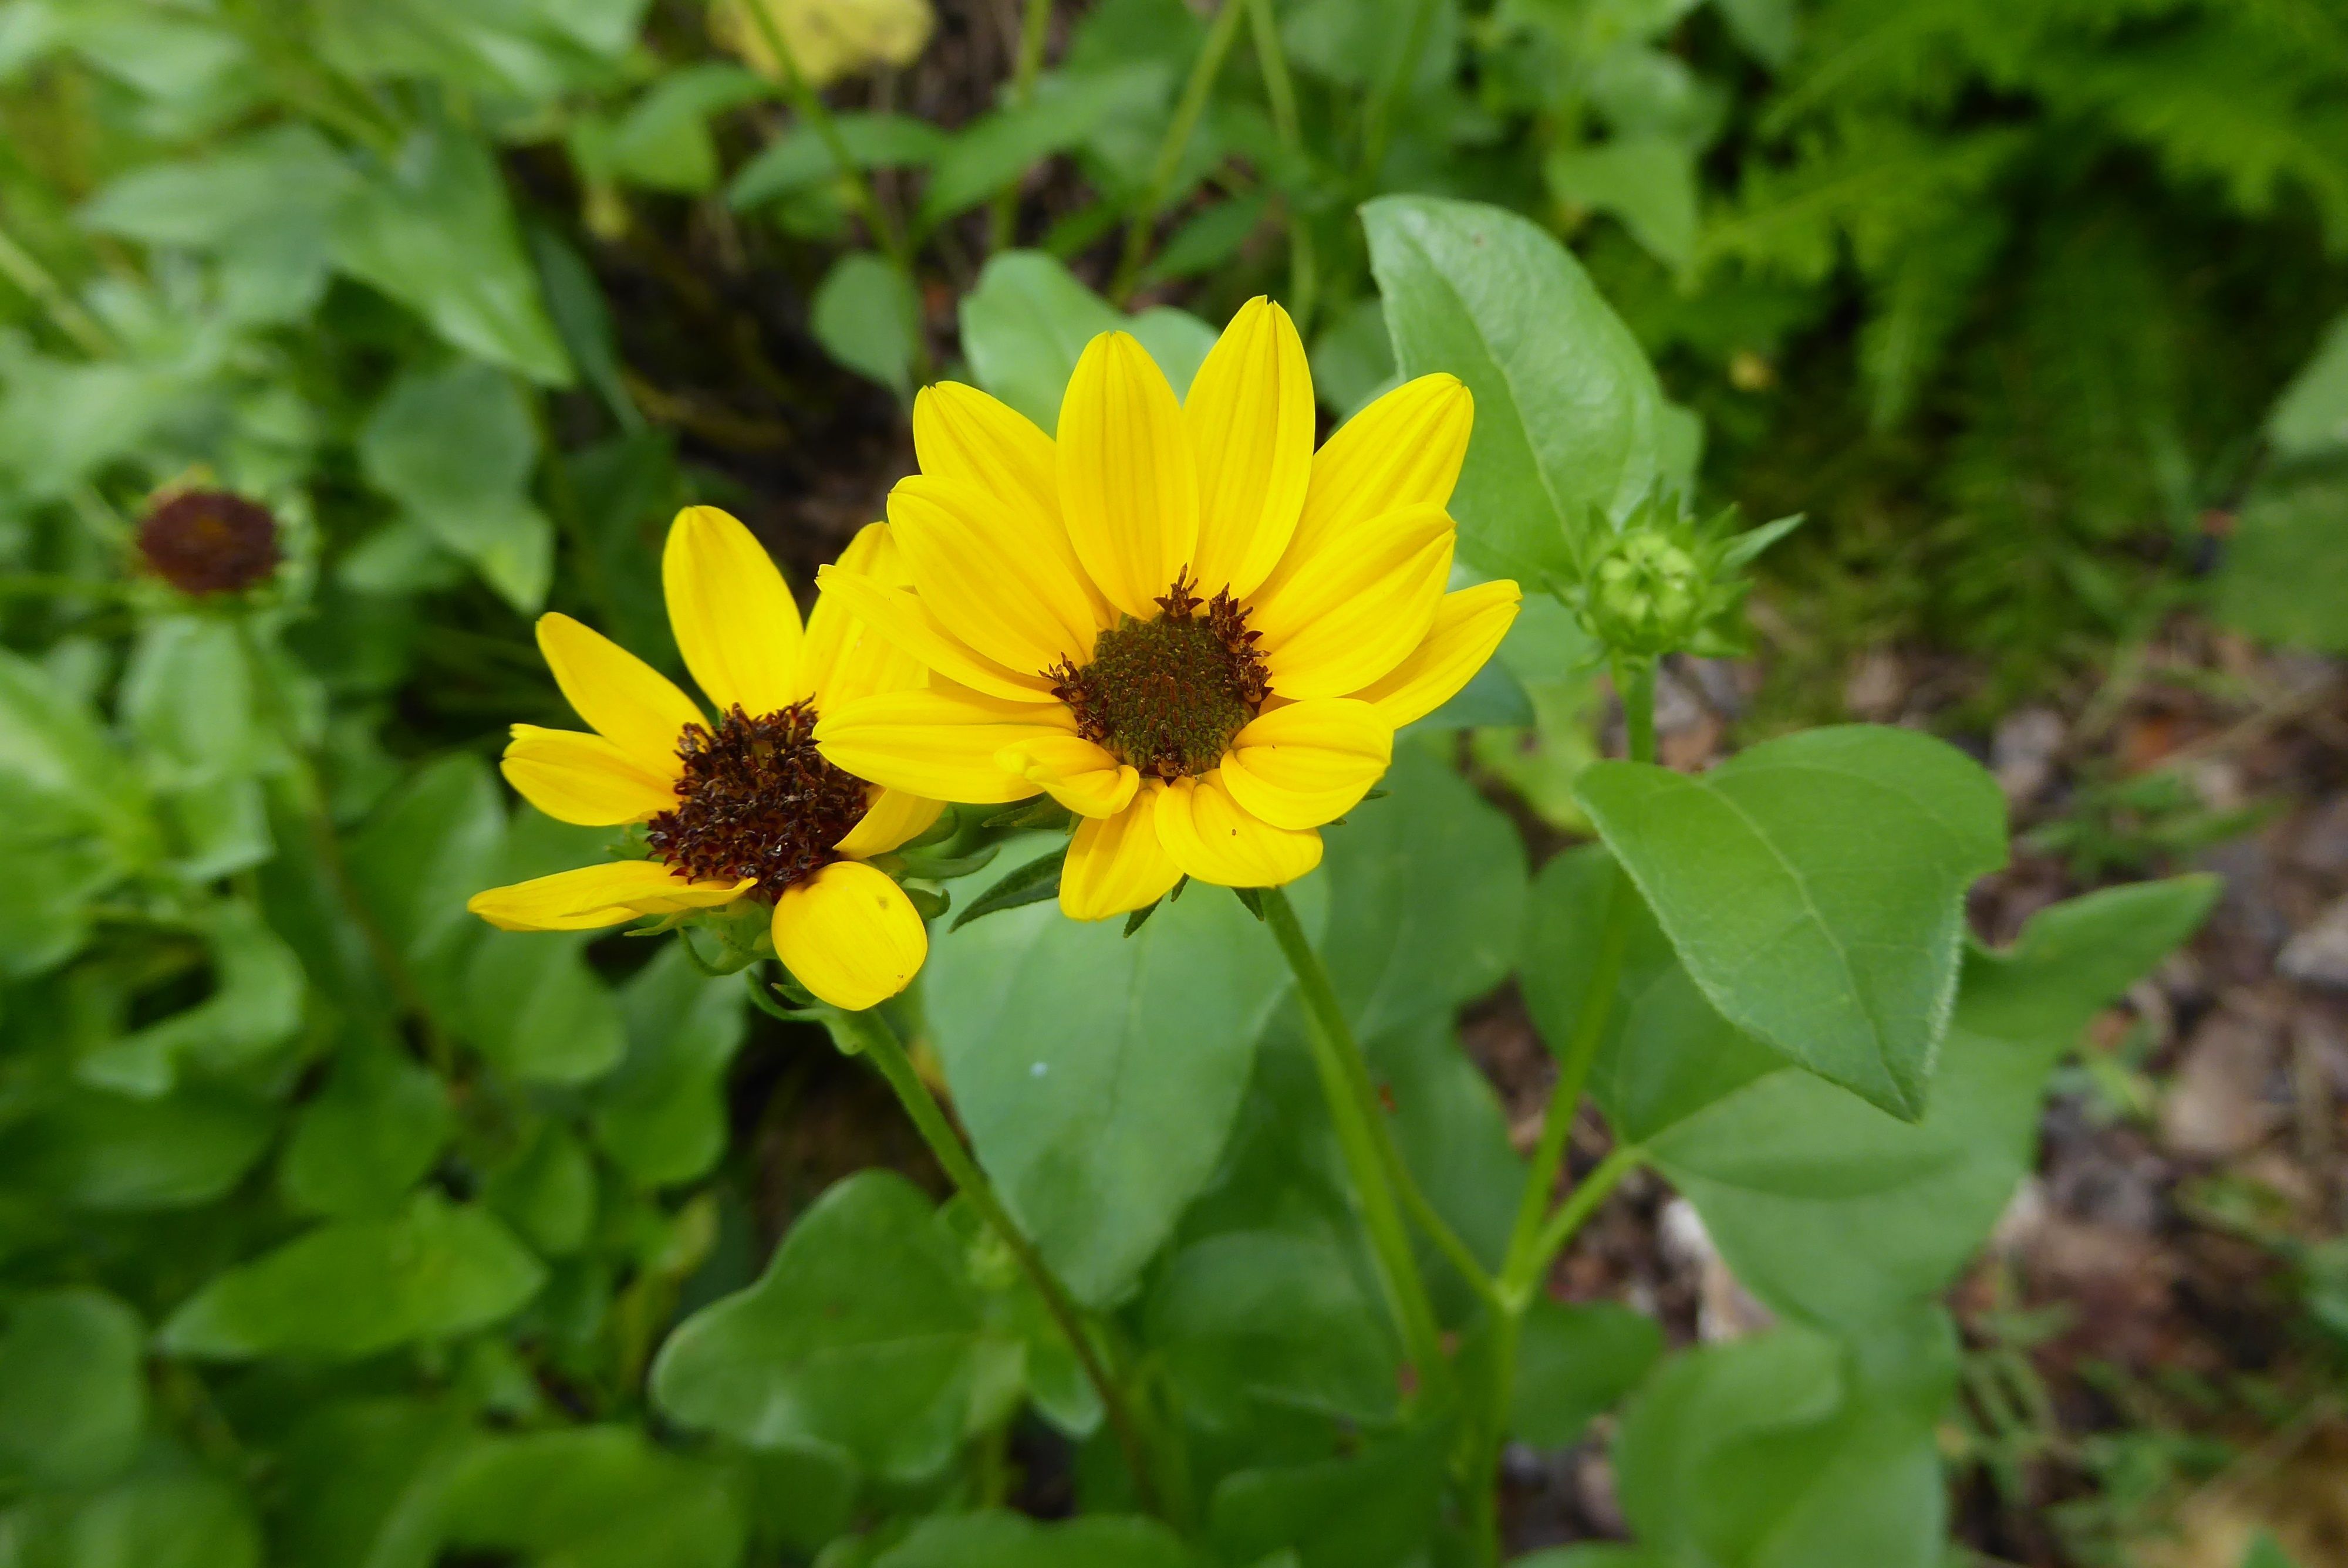 The easy to propagate native Dune Sunflower is a great choice to start.